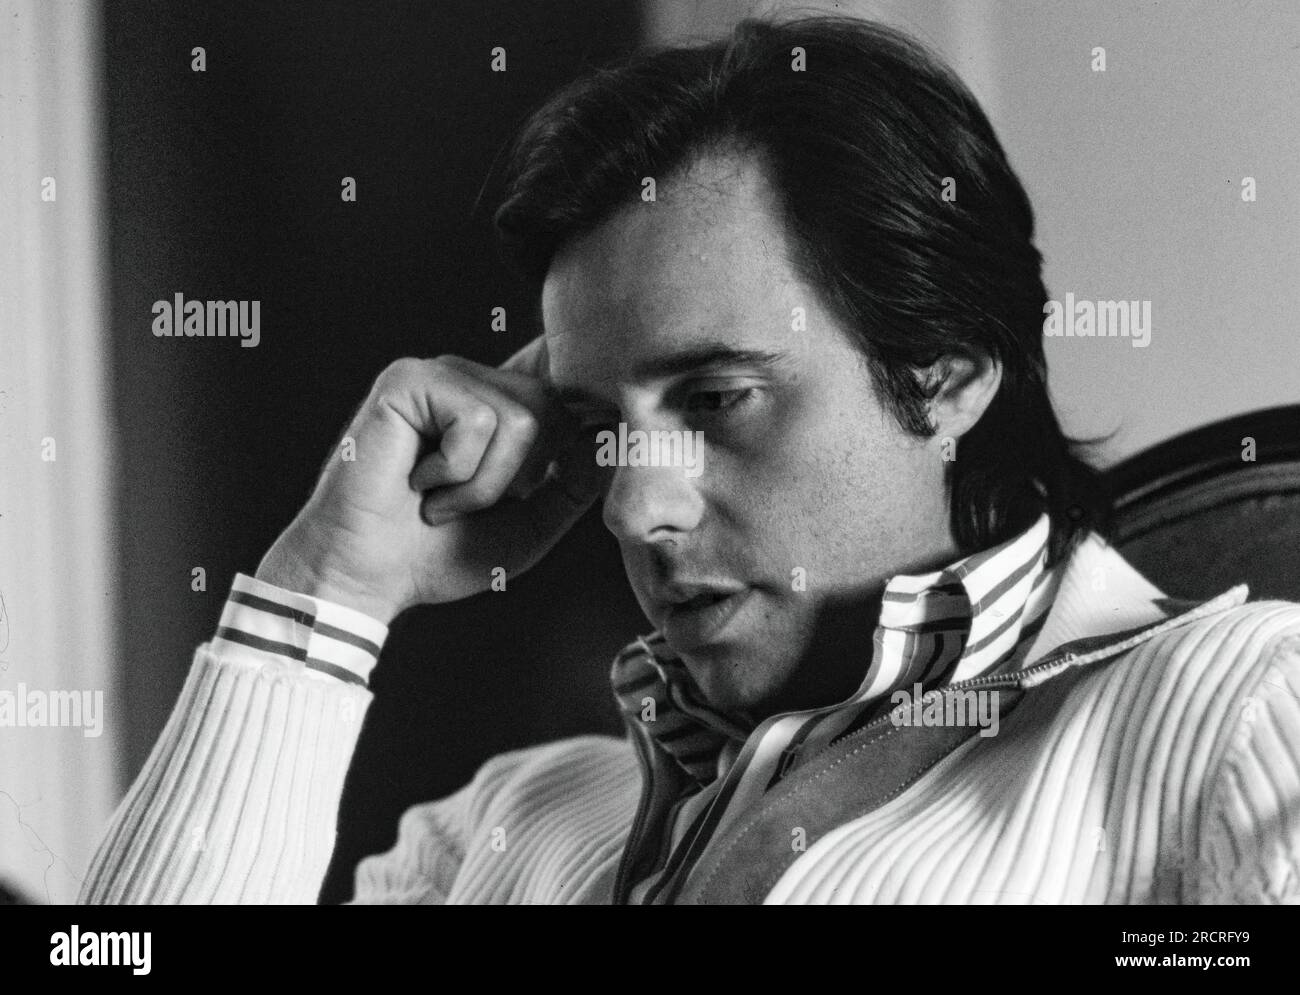 Peter Bogdanovich  (July 30, 1939 – January 6, 2022) was an American director, writer, actor, producer, critic, and film historian, of partial Serbian extraction. He started his career as a film critic for Film Culture and Esquire before becoming a film director in the New Hollywood movement. He received accolades including a BAFTA Award and Grammy Award, as well as nominations for two Academy Awards and two Golden Globe Awards.  Bogdanovich worked as a film journalist until he was hired to work on Roger Corman's The Wild Angels (1966). Photograph by Bernard Gotfryd Stock Photo